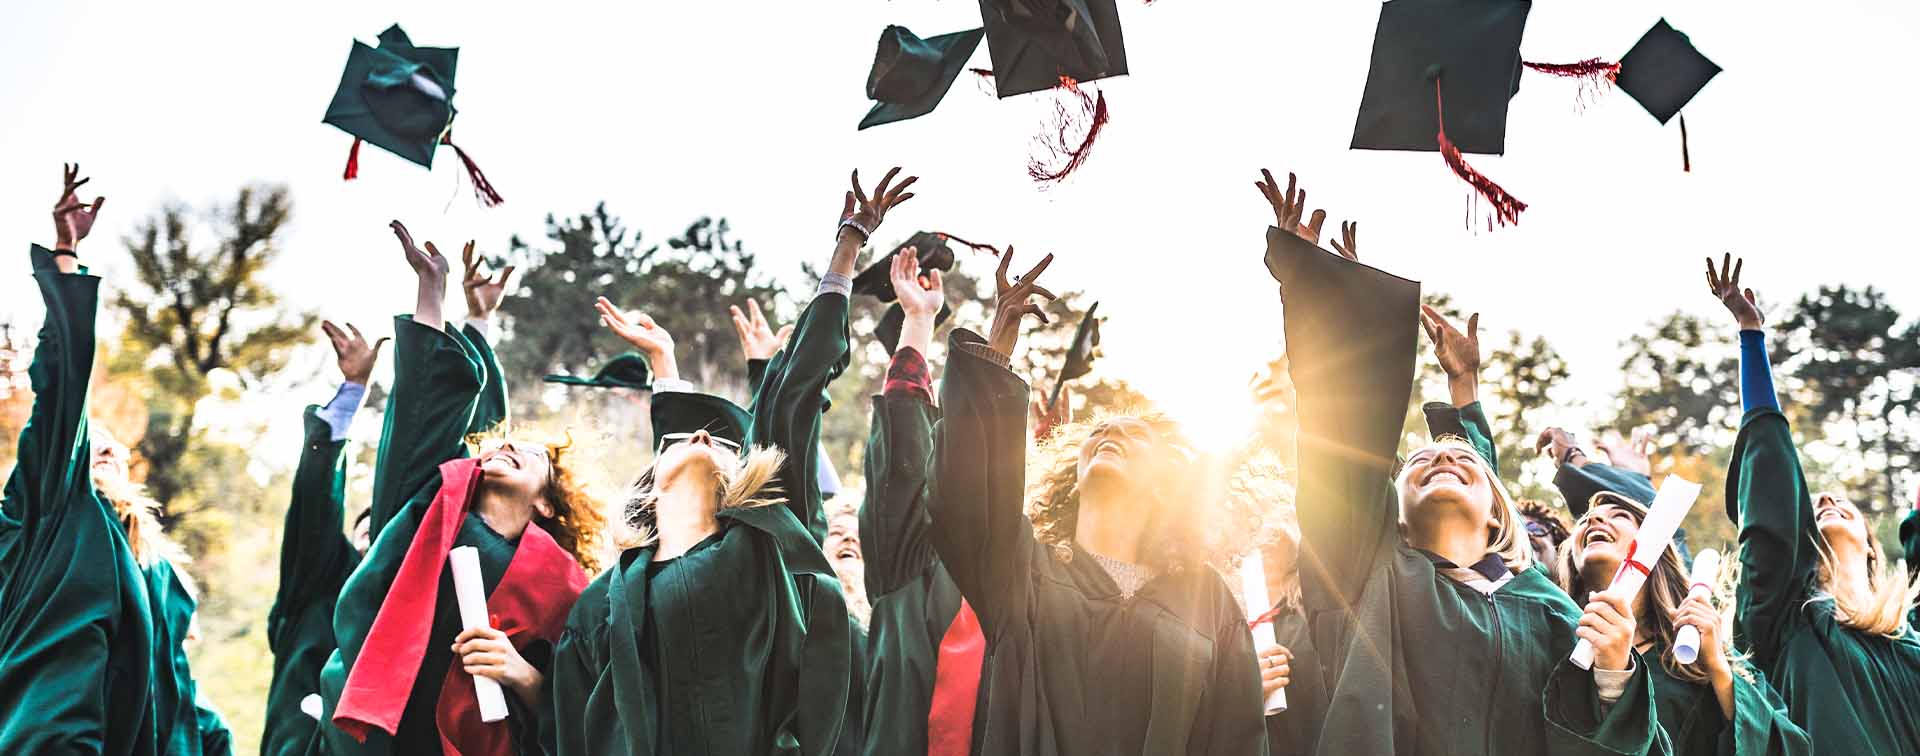 Large group of happy college students celebrating their graduation day outdoors while throwing their caps up in the air